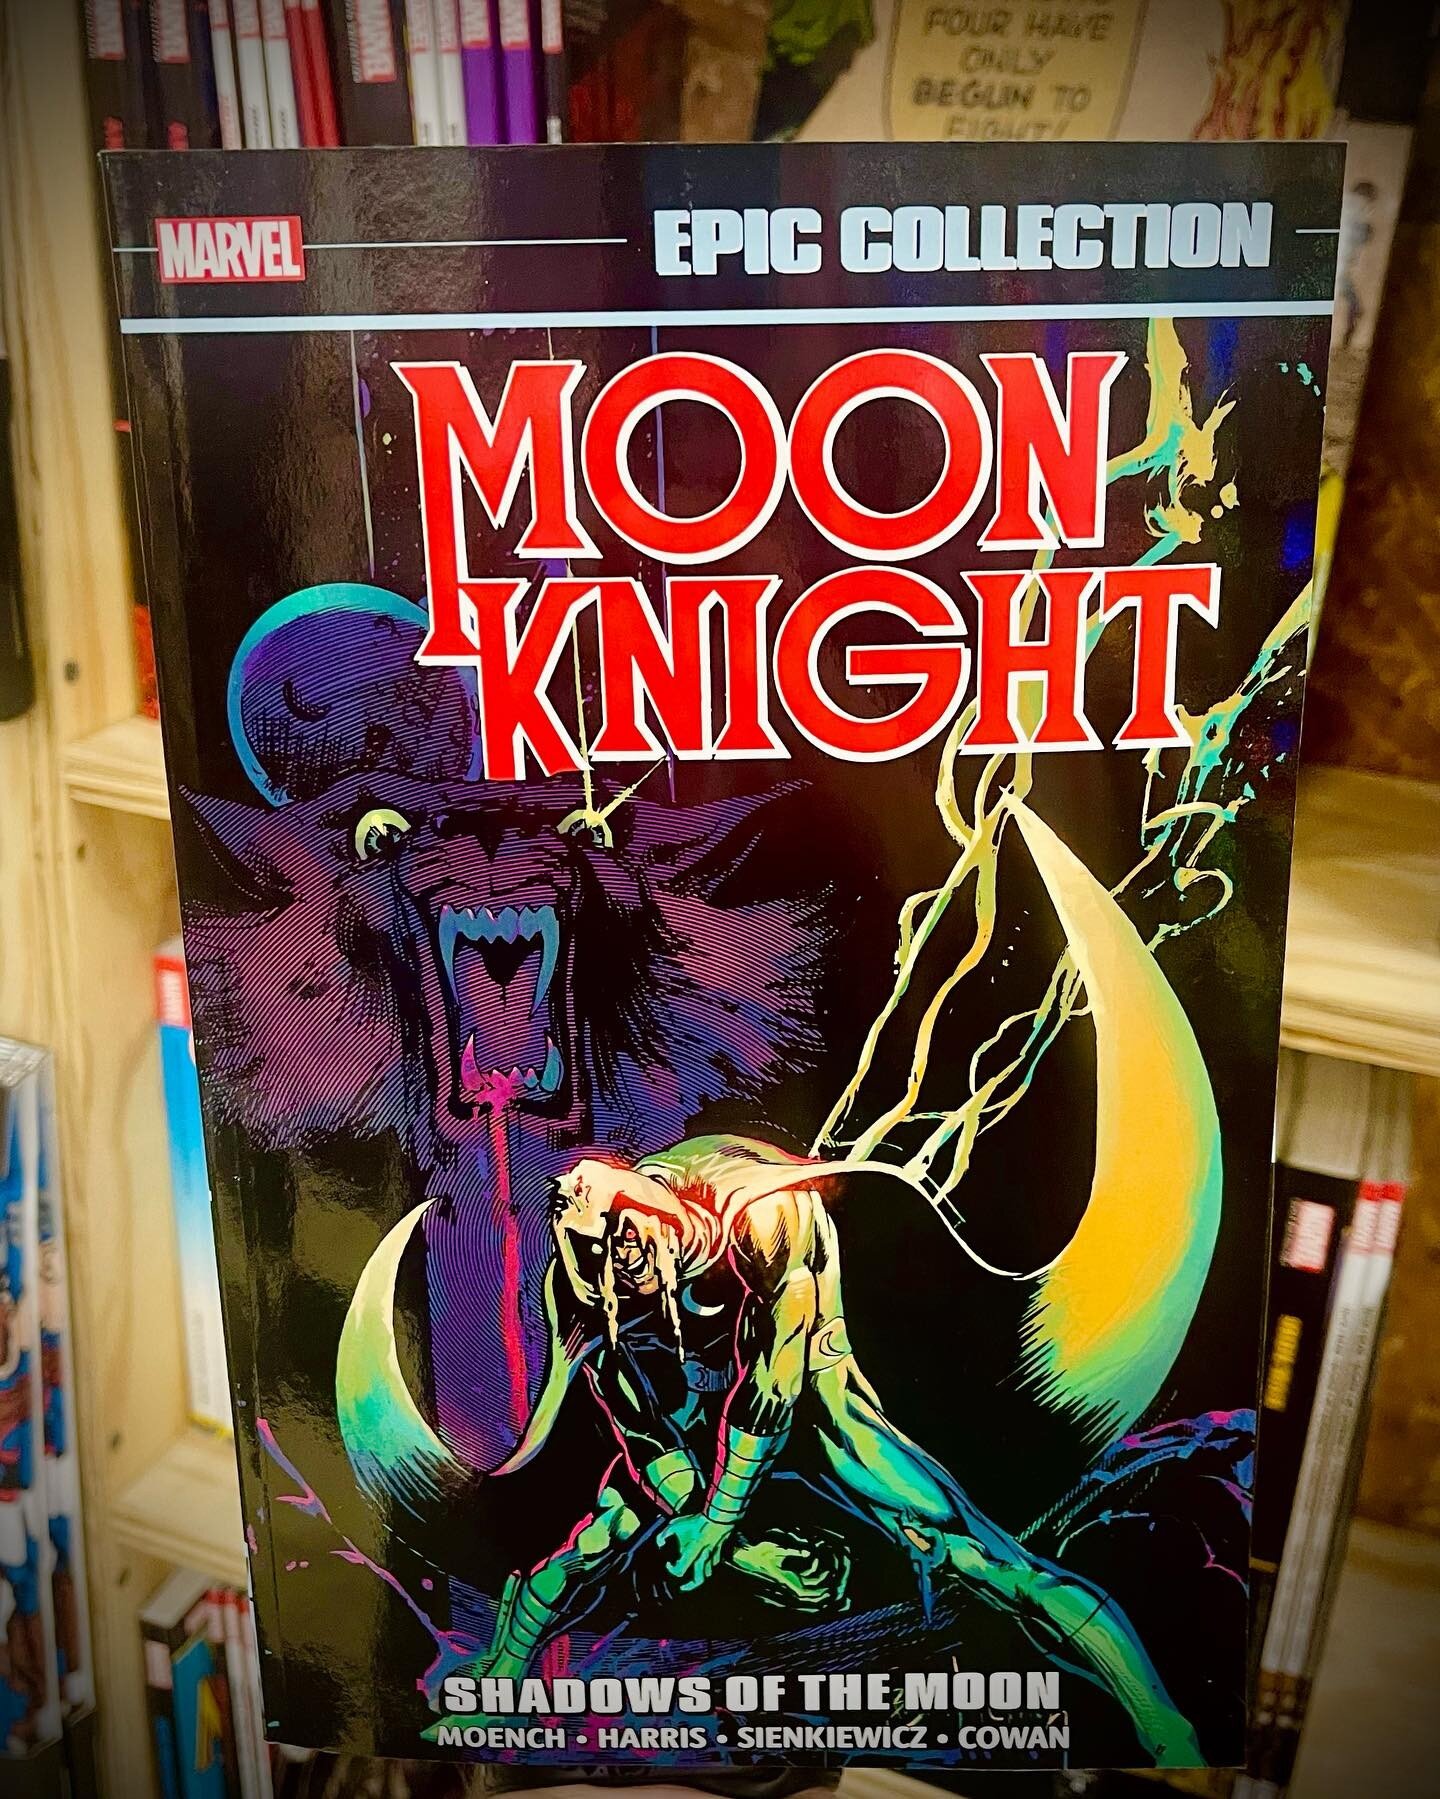 Any day is a perfect day to brush up on Moon Knight, but today might just be better than most. 🌙🧐 #moonknight #marvel #marvelcomics #comics #comicbooks #nerdy #geeky #graphicnovel #comicbookstore #local #shoplocal #lcbs #localcomicshop #comicstore 